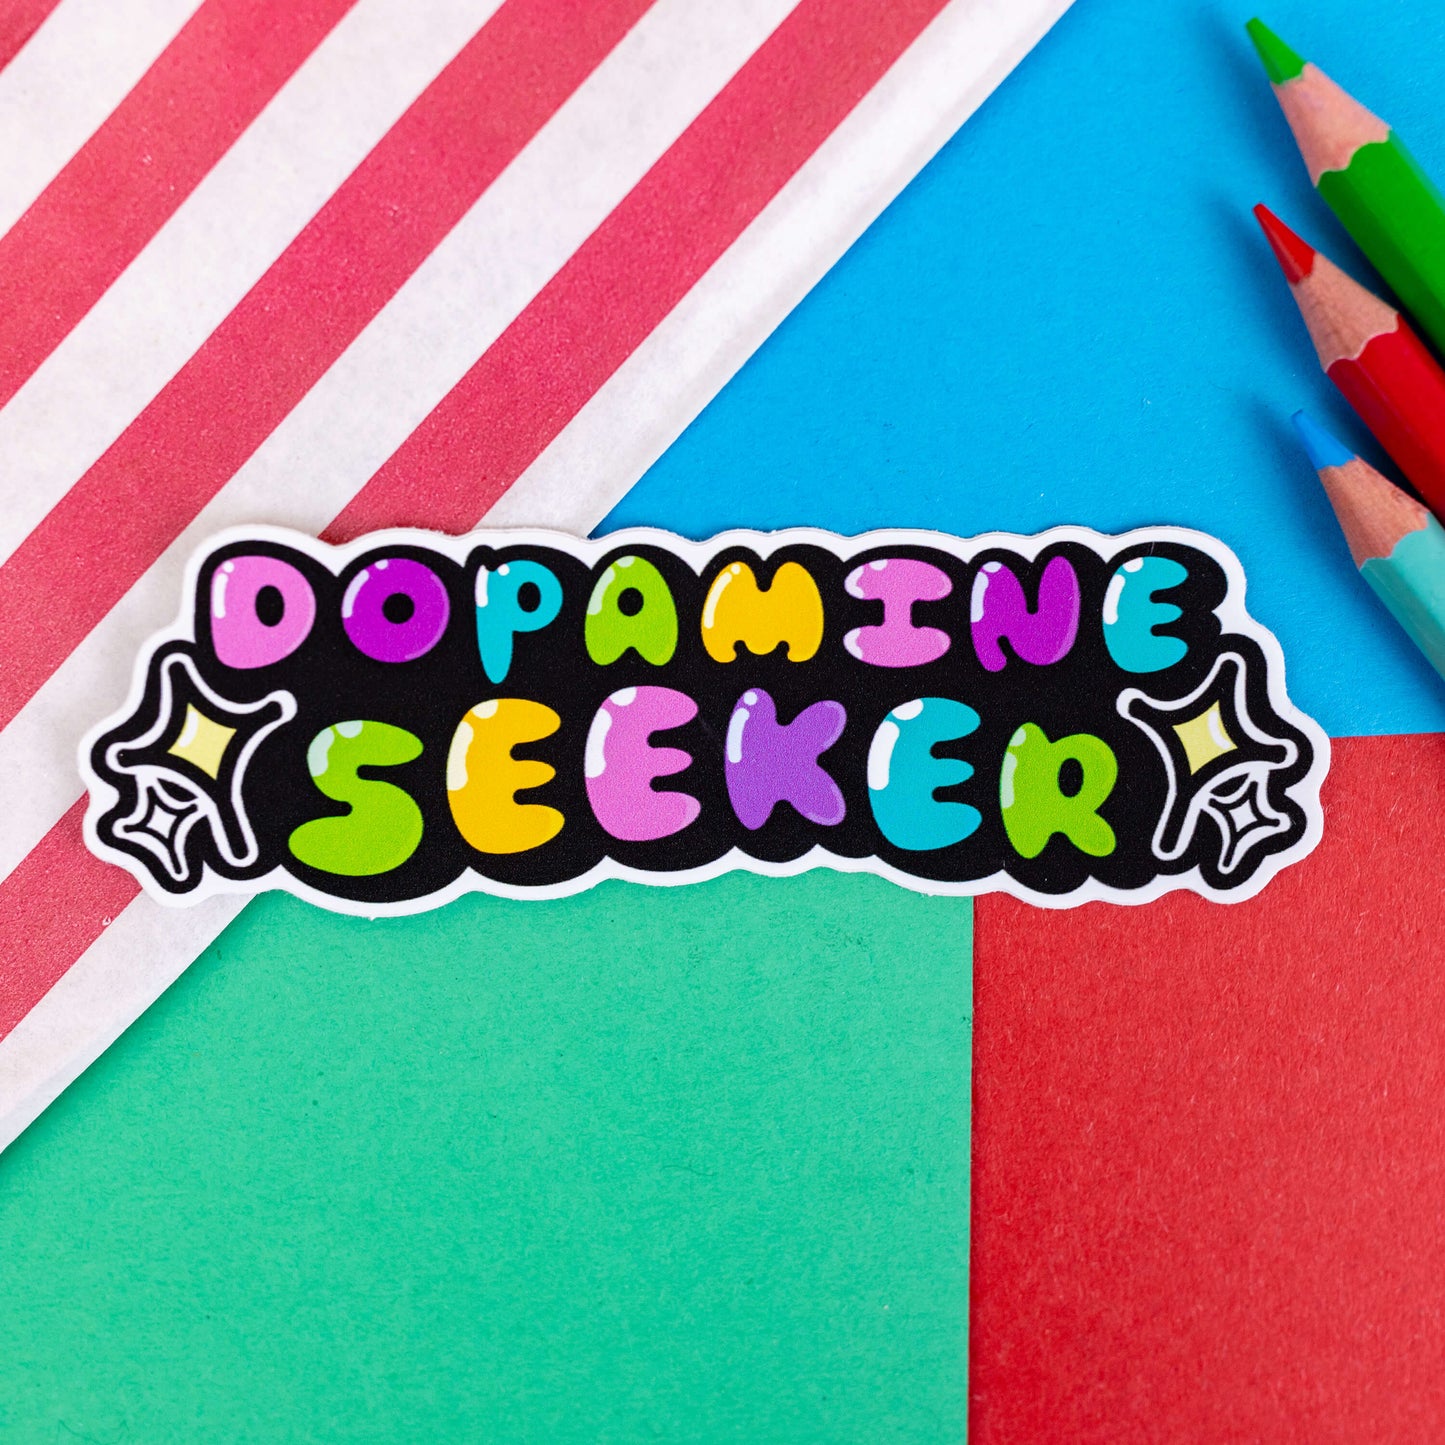 The Dopamine Seeker Sticker on a red, blue and green background with colouring pencils and a red stripe candy bag. The rainbow bubble font sticker reads 'dopamine seeker' with yellow, black and white sparkles either side. The design is raising awareness for ADHD and neurodivergence.